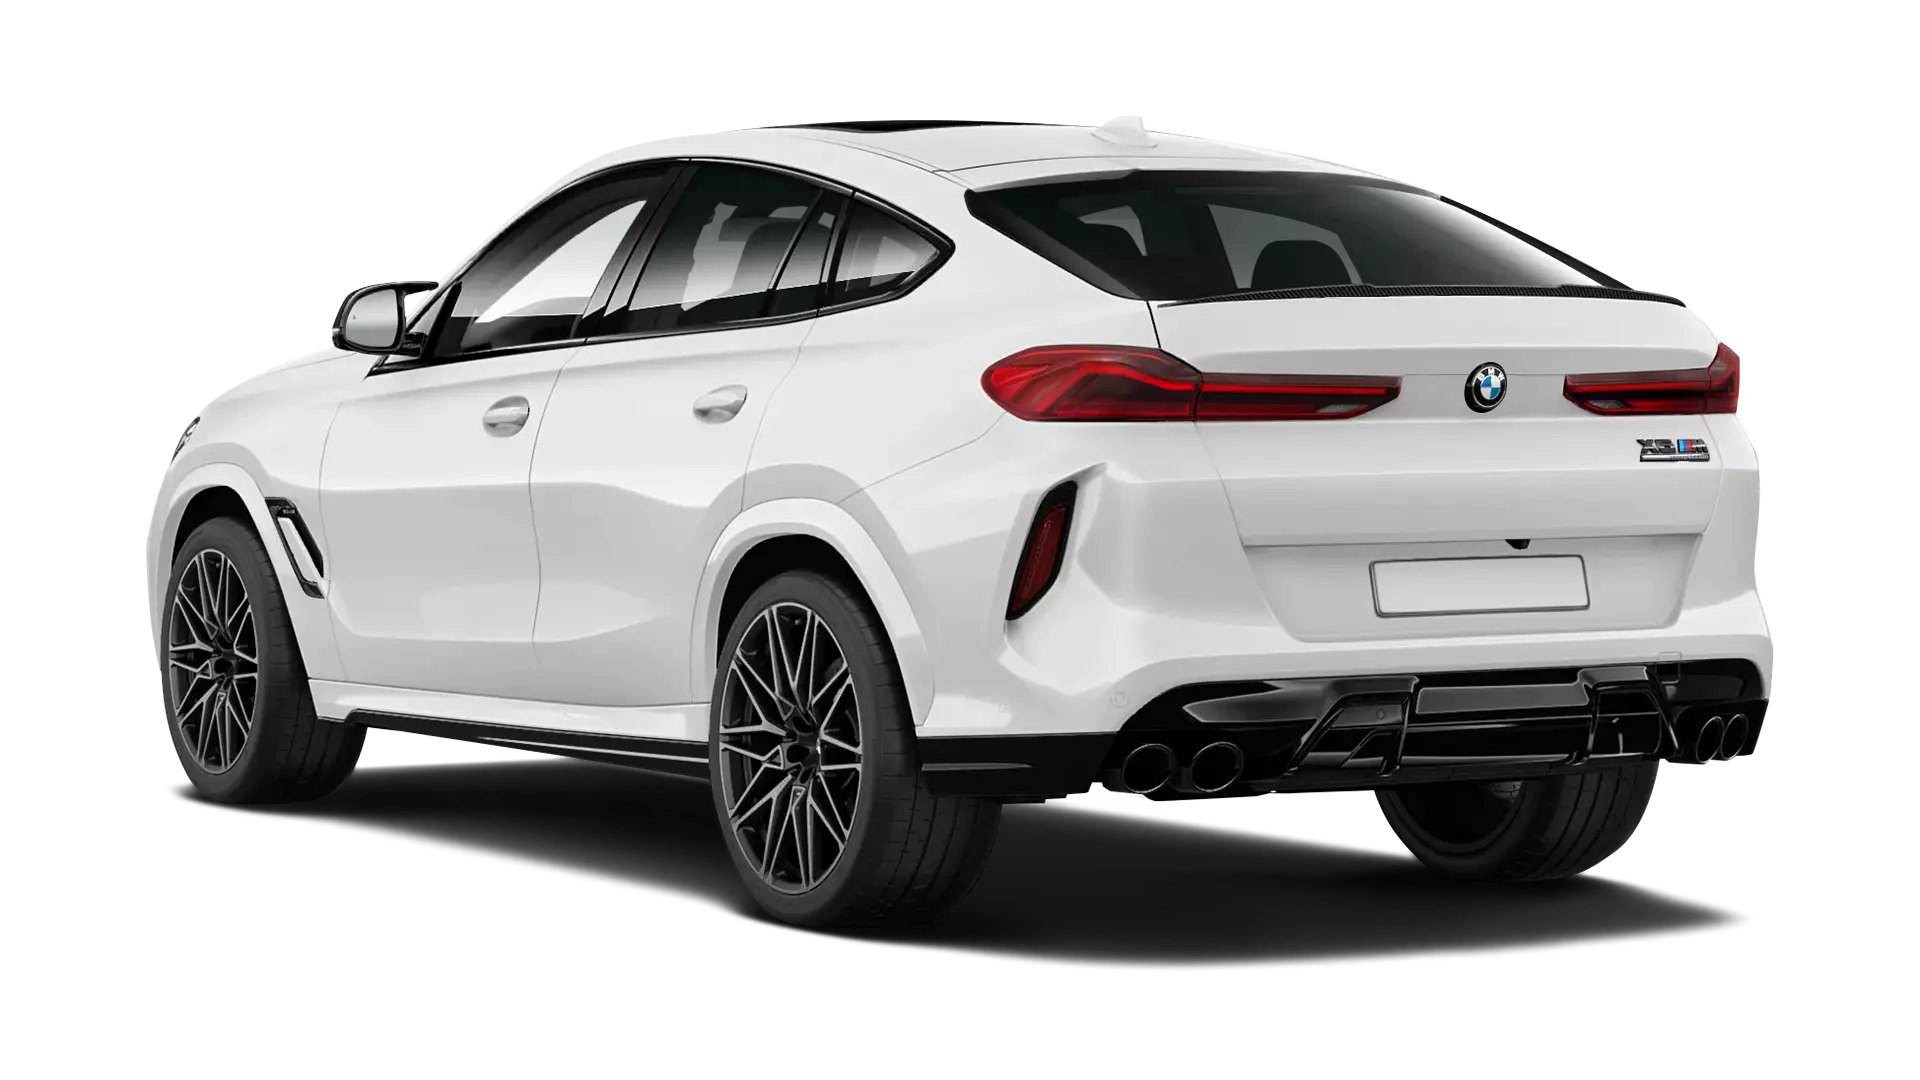 BMW X6M F96 stock rear view in Snow White color